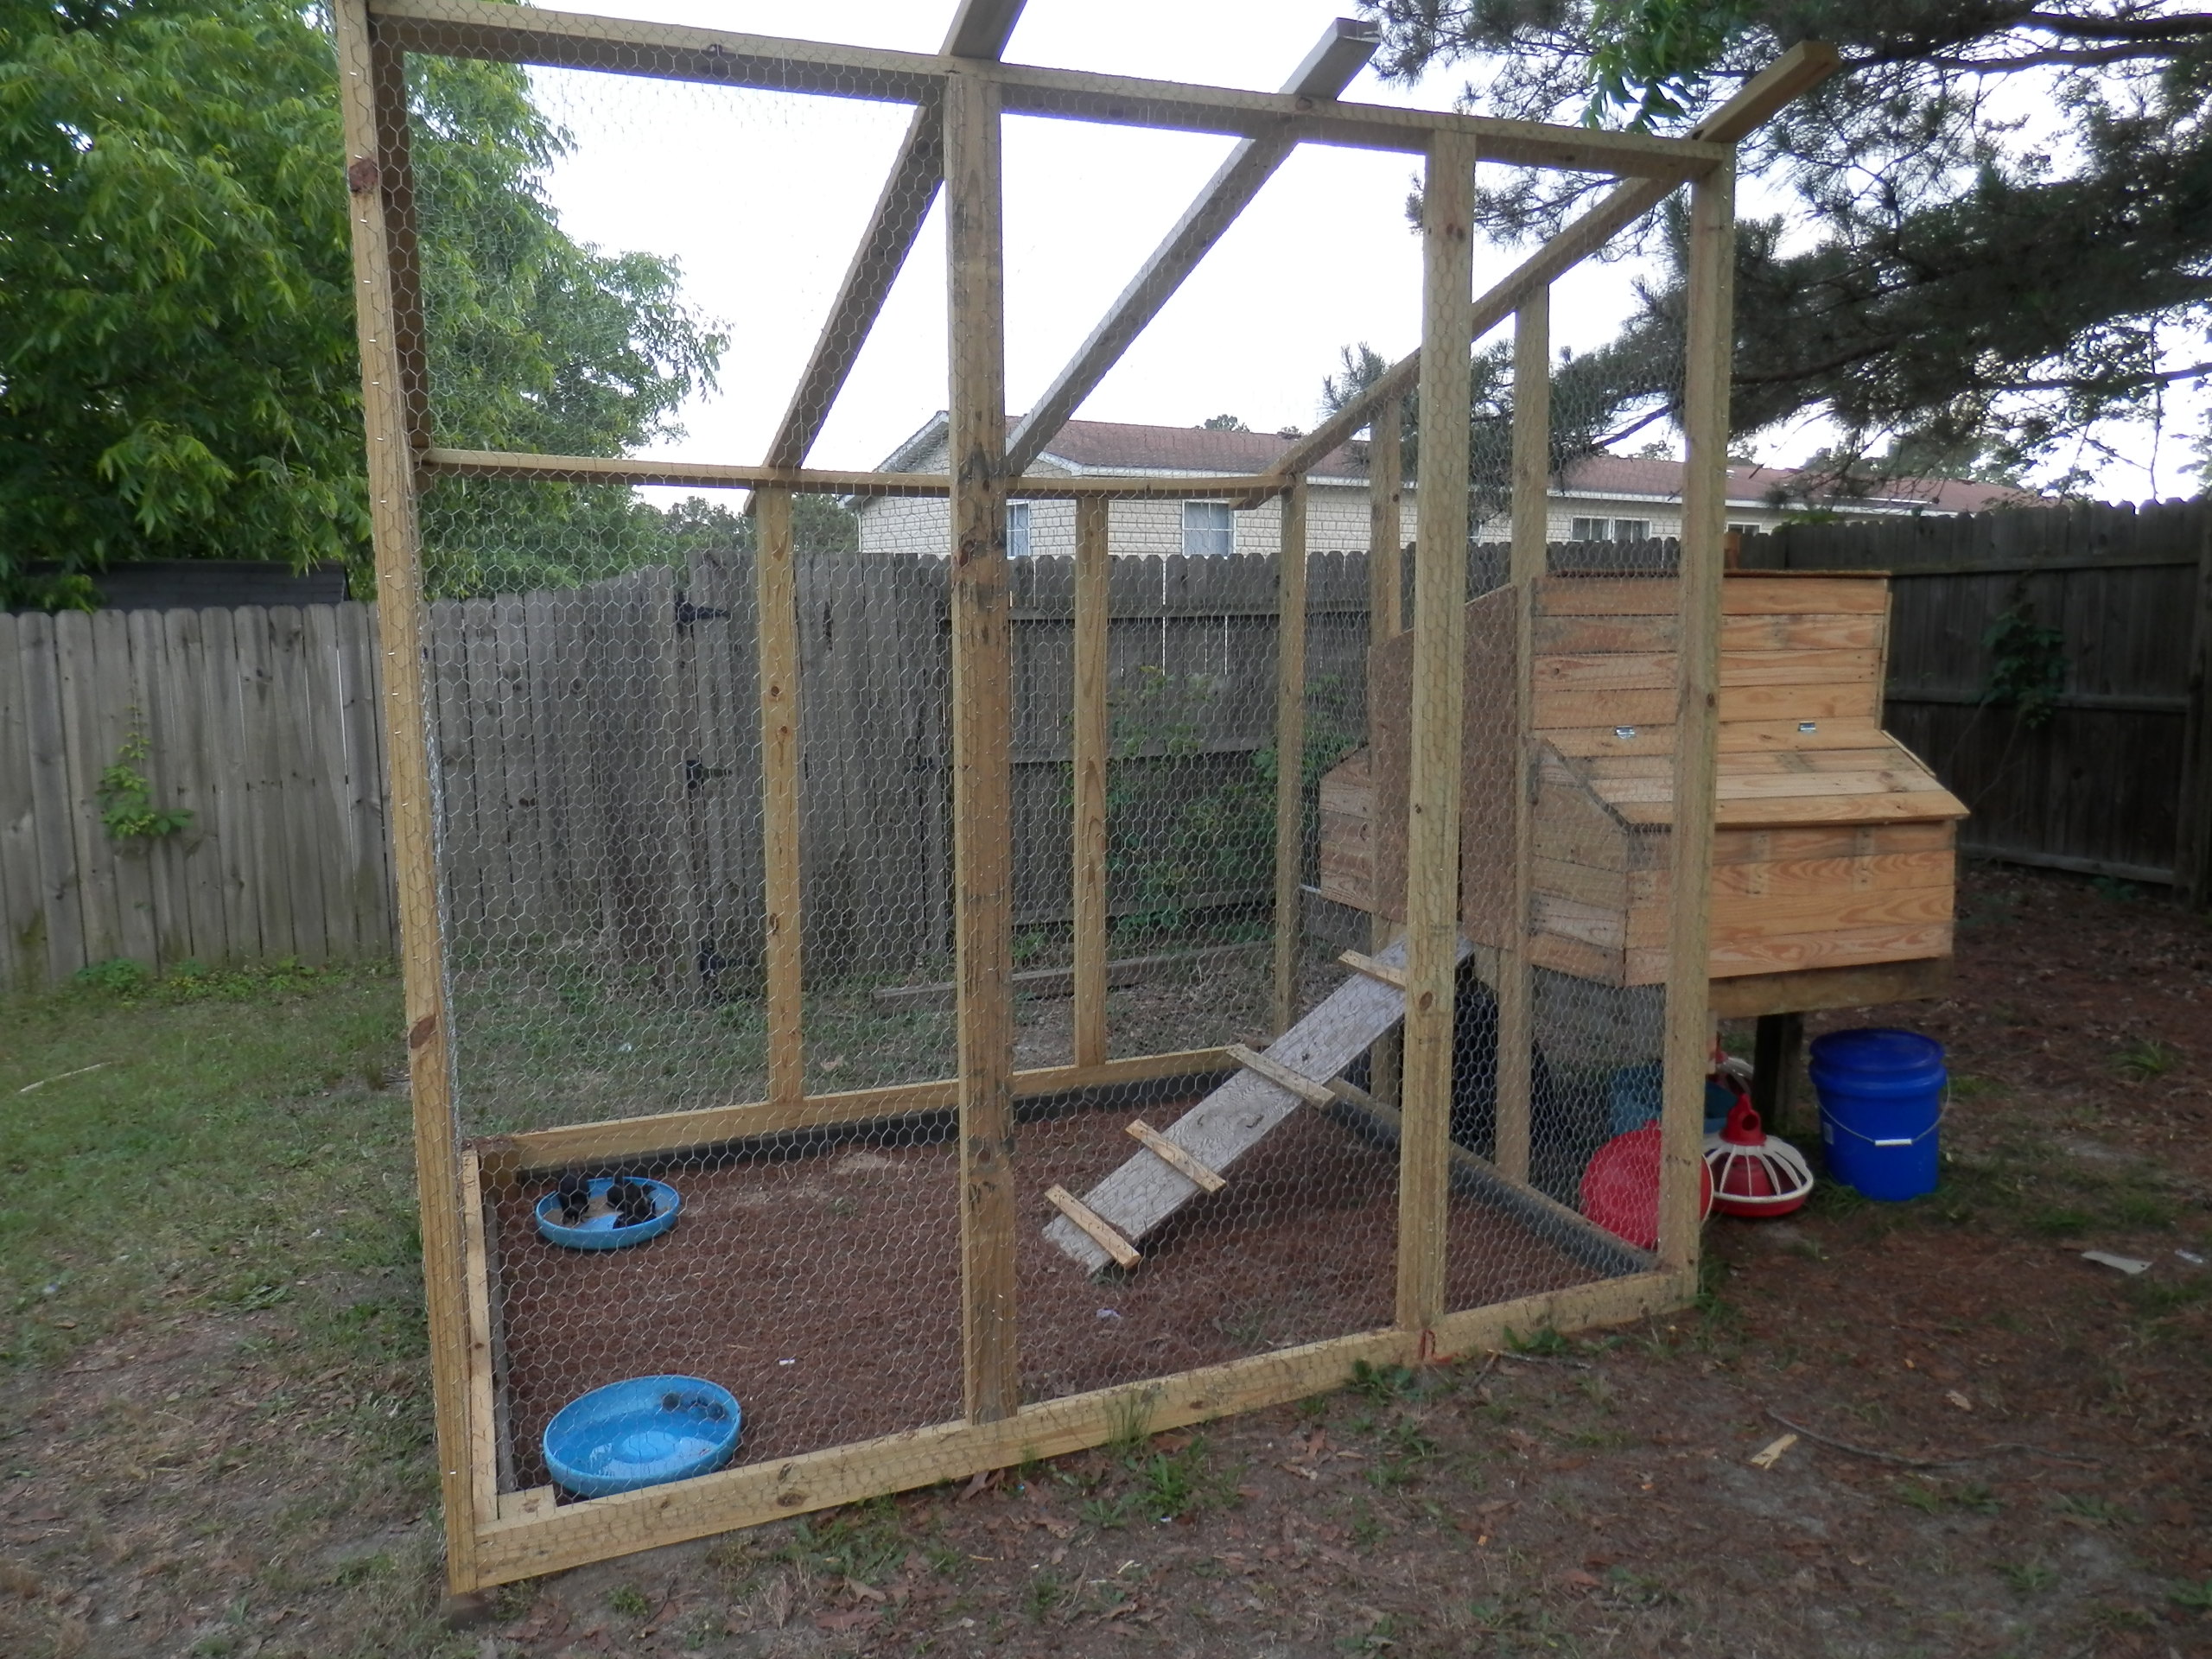 The chicken coop my husband and I built before we installed the tin roof.